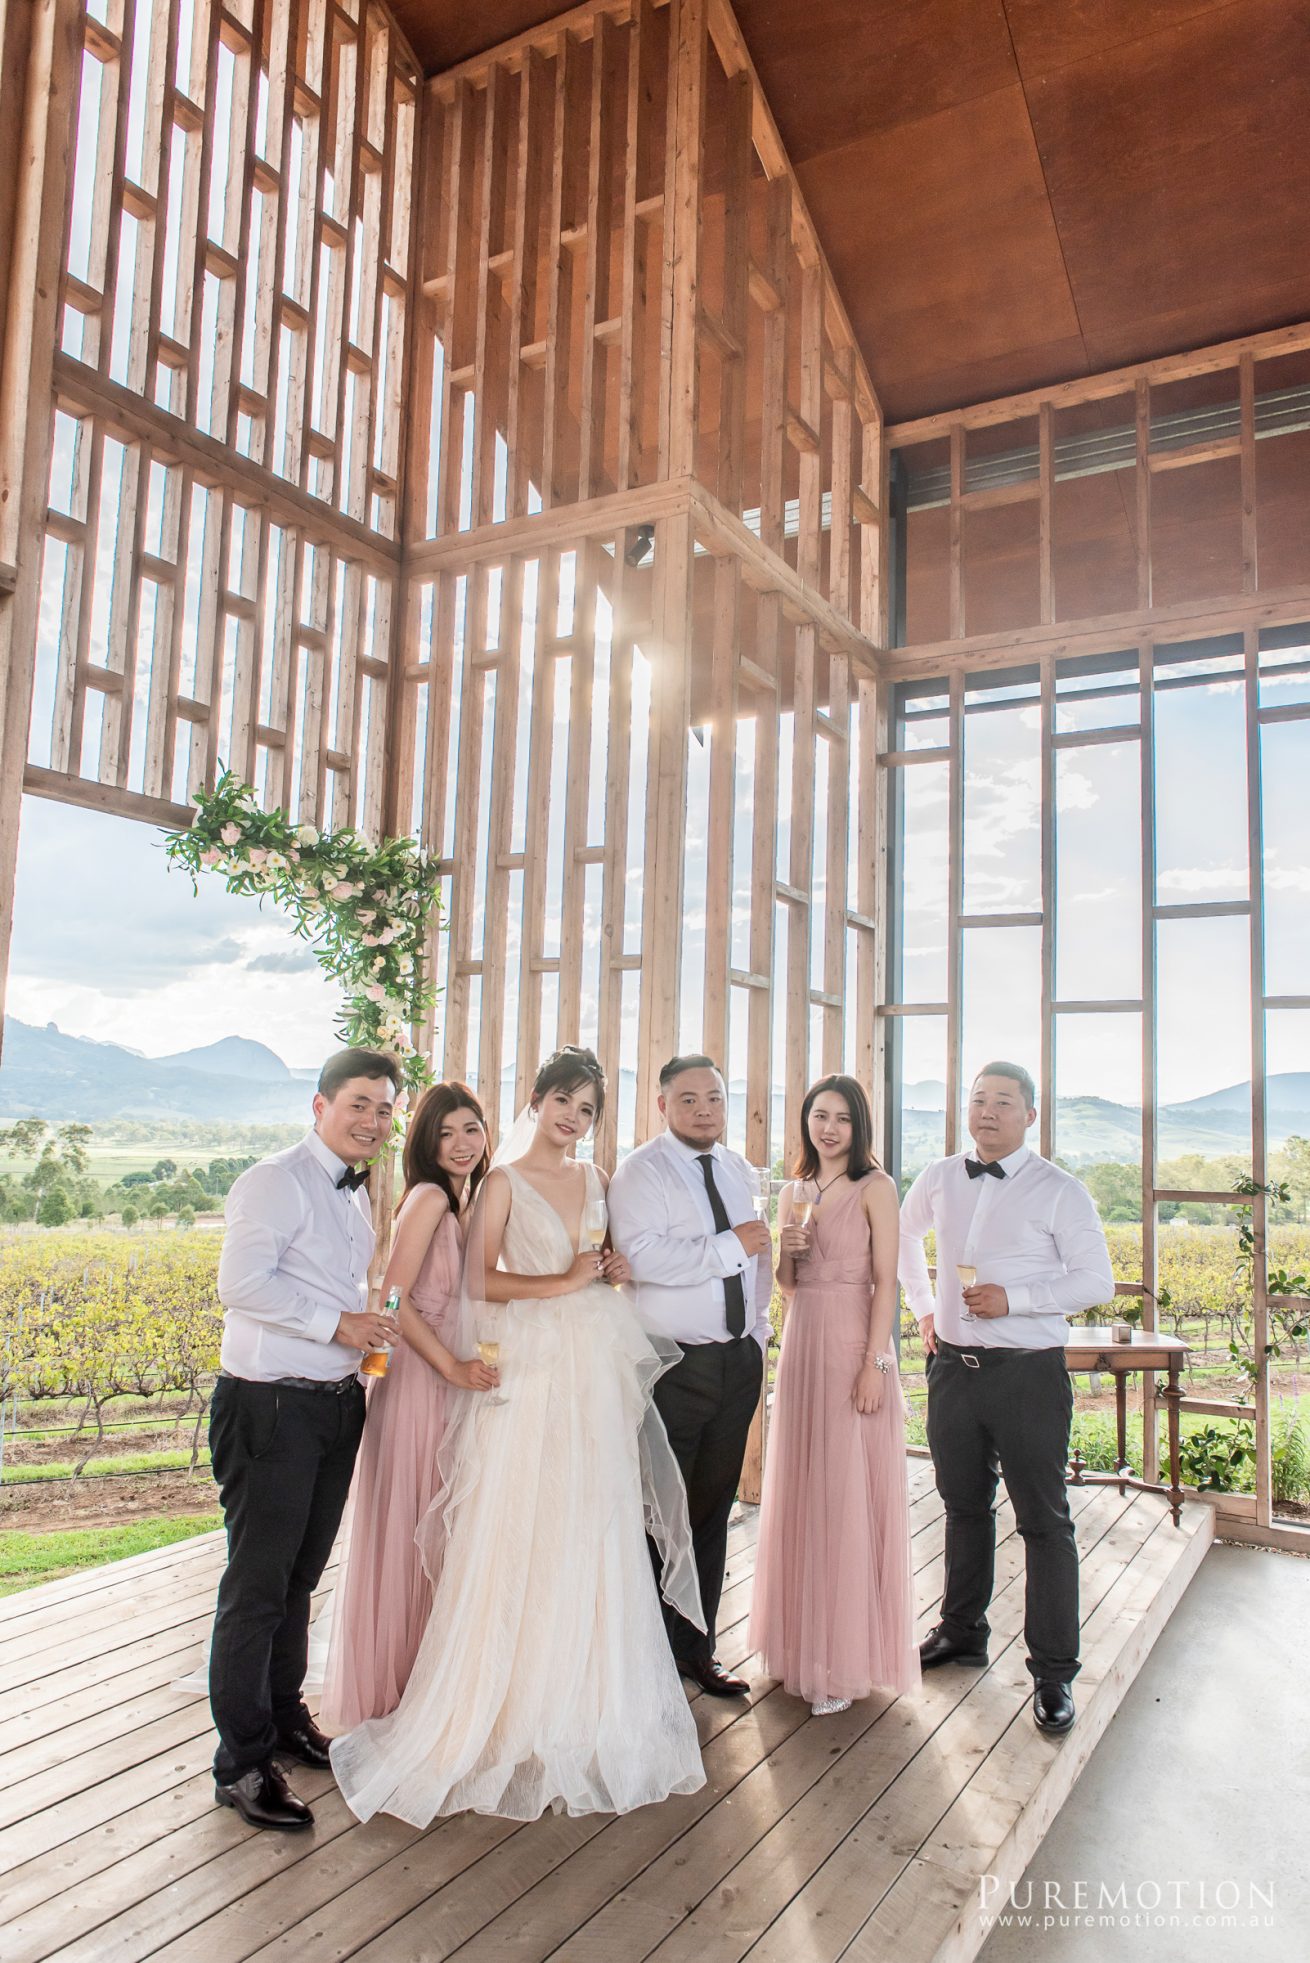 190323 Puremotion Wedding Photography Kooroomba Lavender Alex Huang ArielRico_Edited-0056